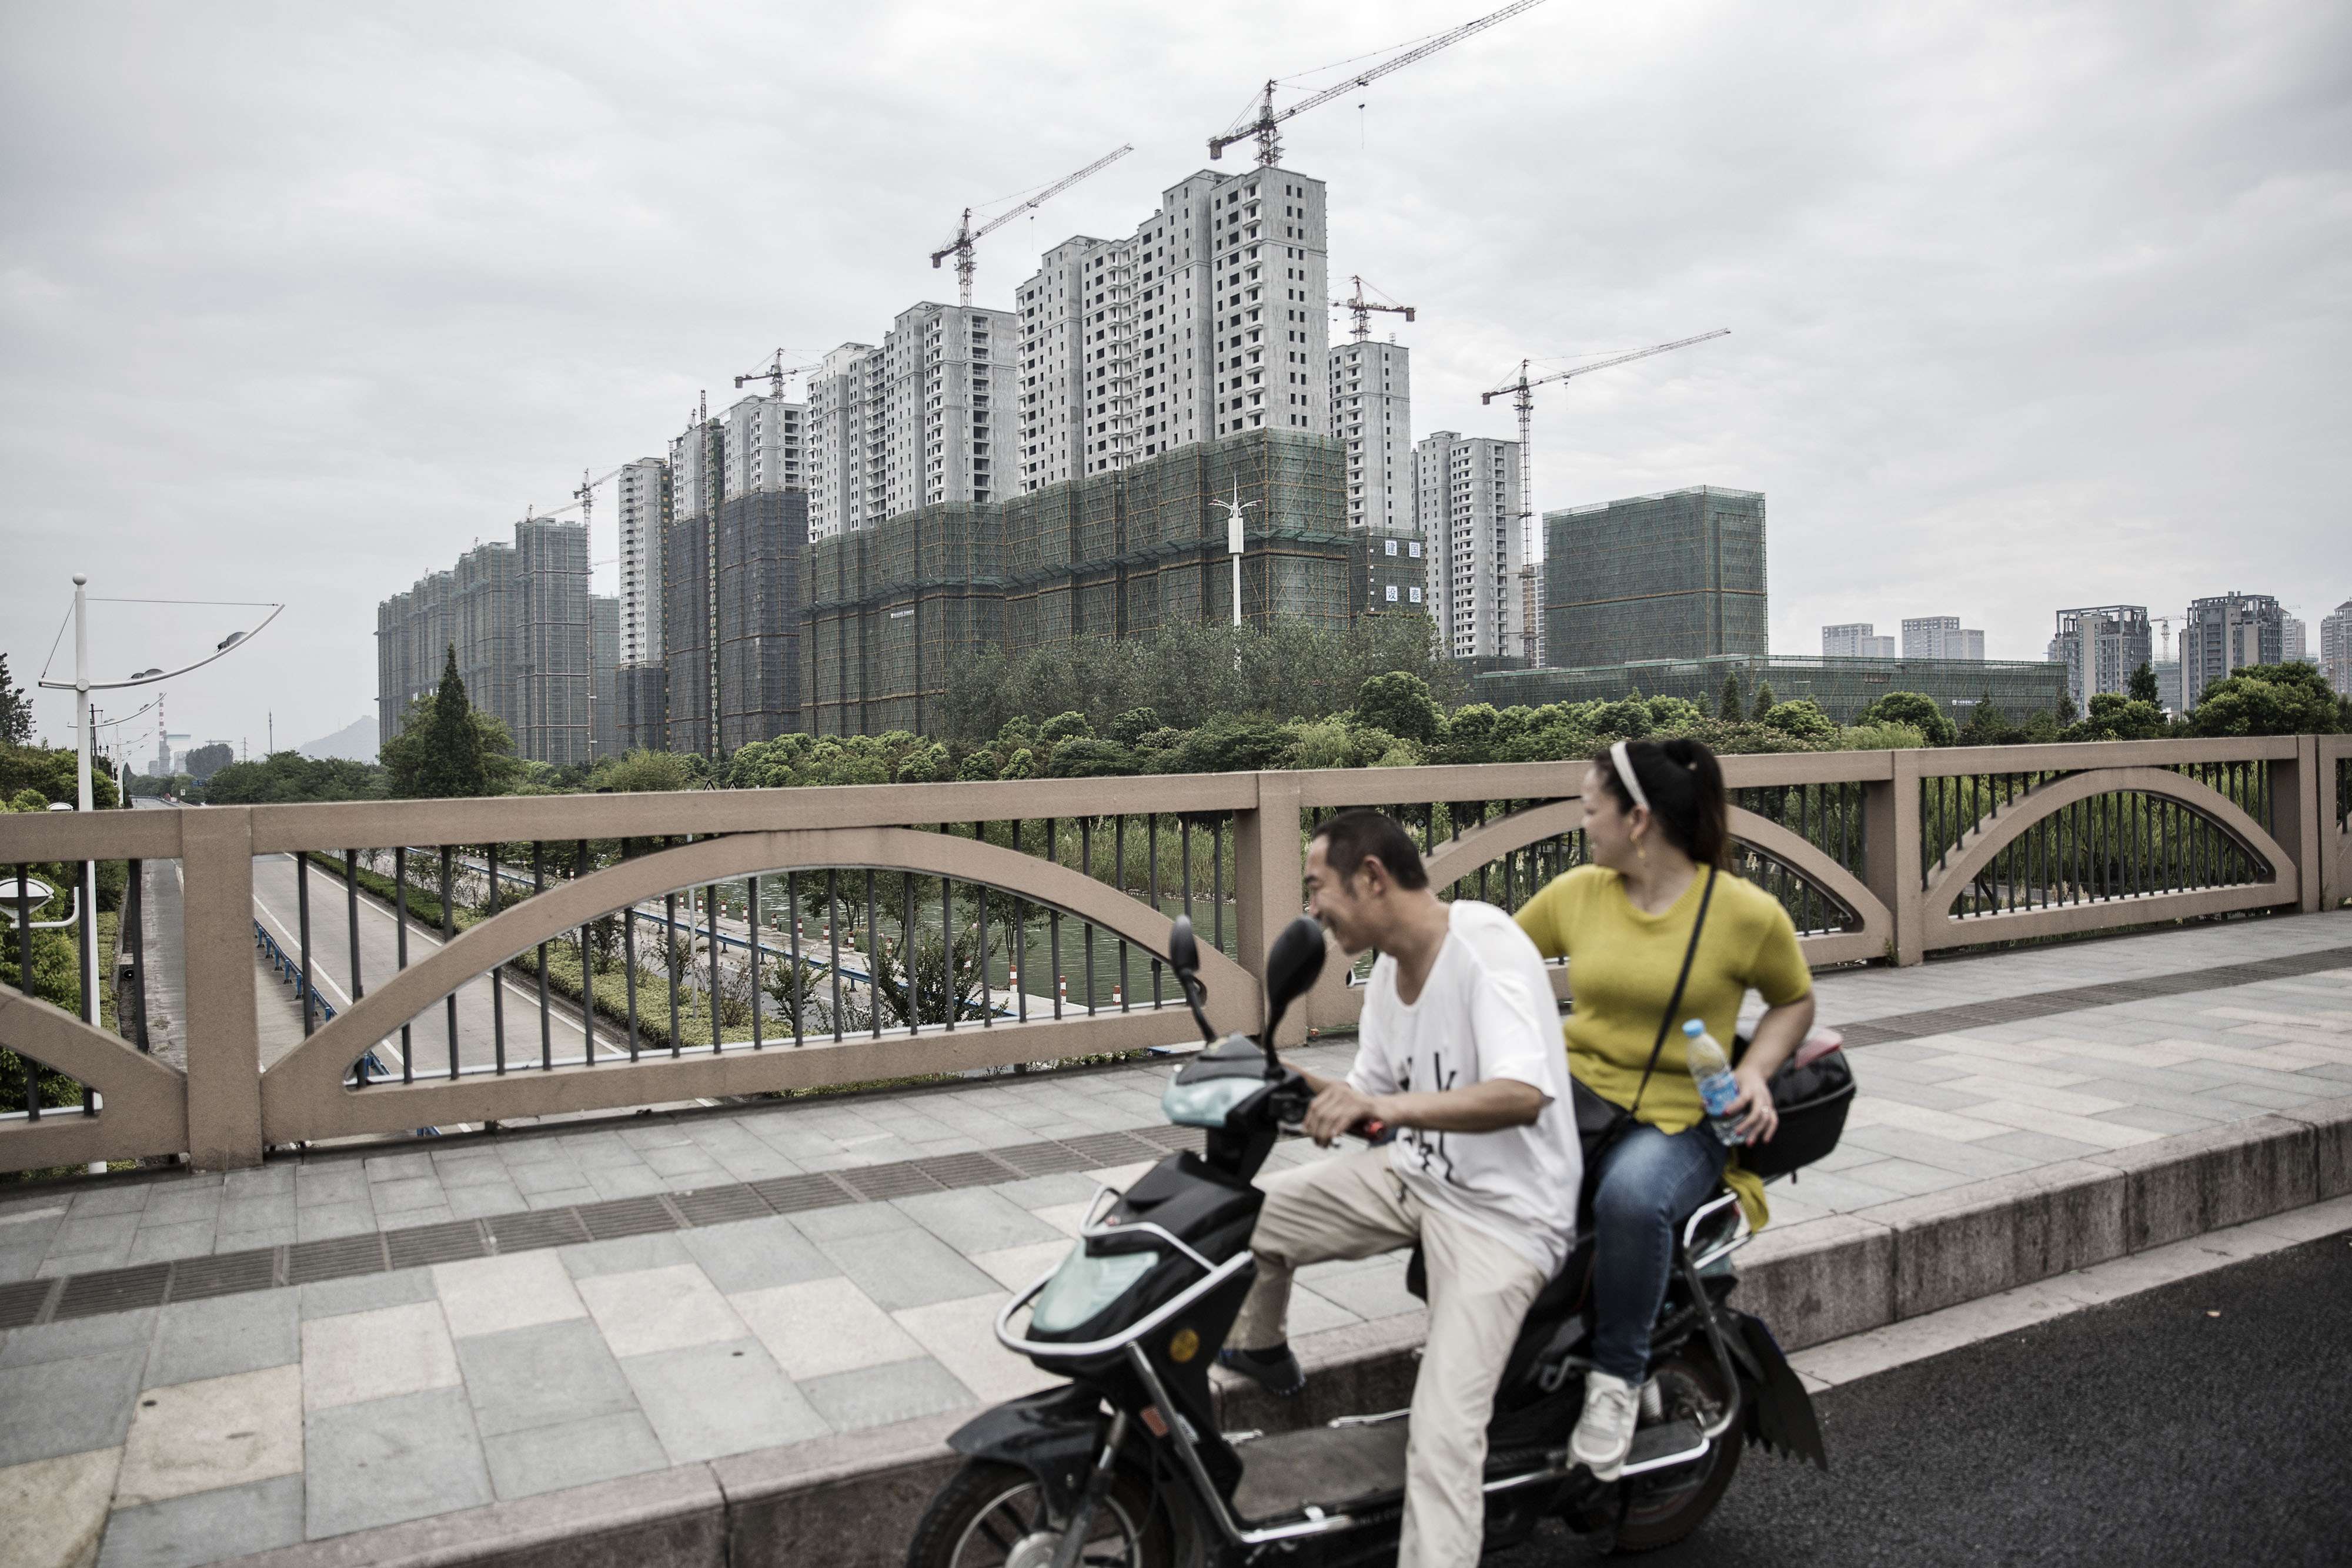 Promising second-tier cities, such as Nanjing, Hangzhou and Suzhou are fast becoming destinations of choice for property investors. Photo: Bloomberg